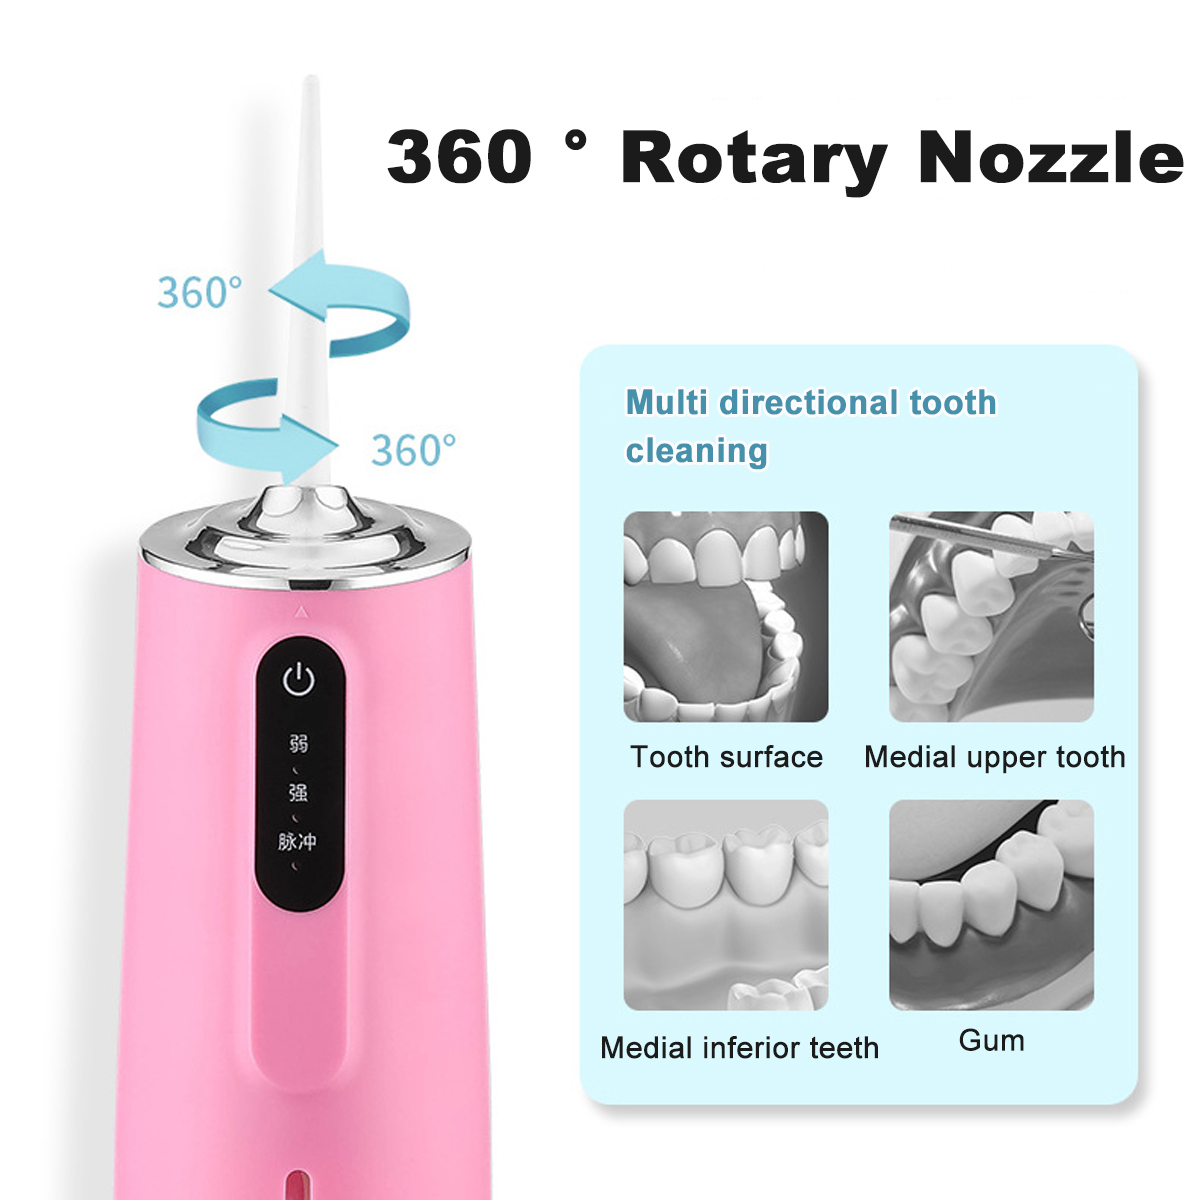 240ml-3-Modes-Cordless-Electric-Oral-Irrigator-Waterproof-USB-Rechargeable-Teeth-Water-Flosser-Tooth-1893394-8